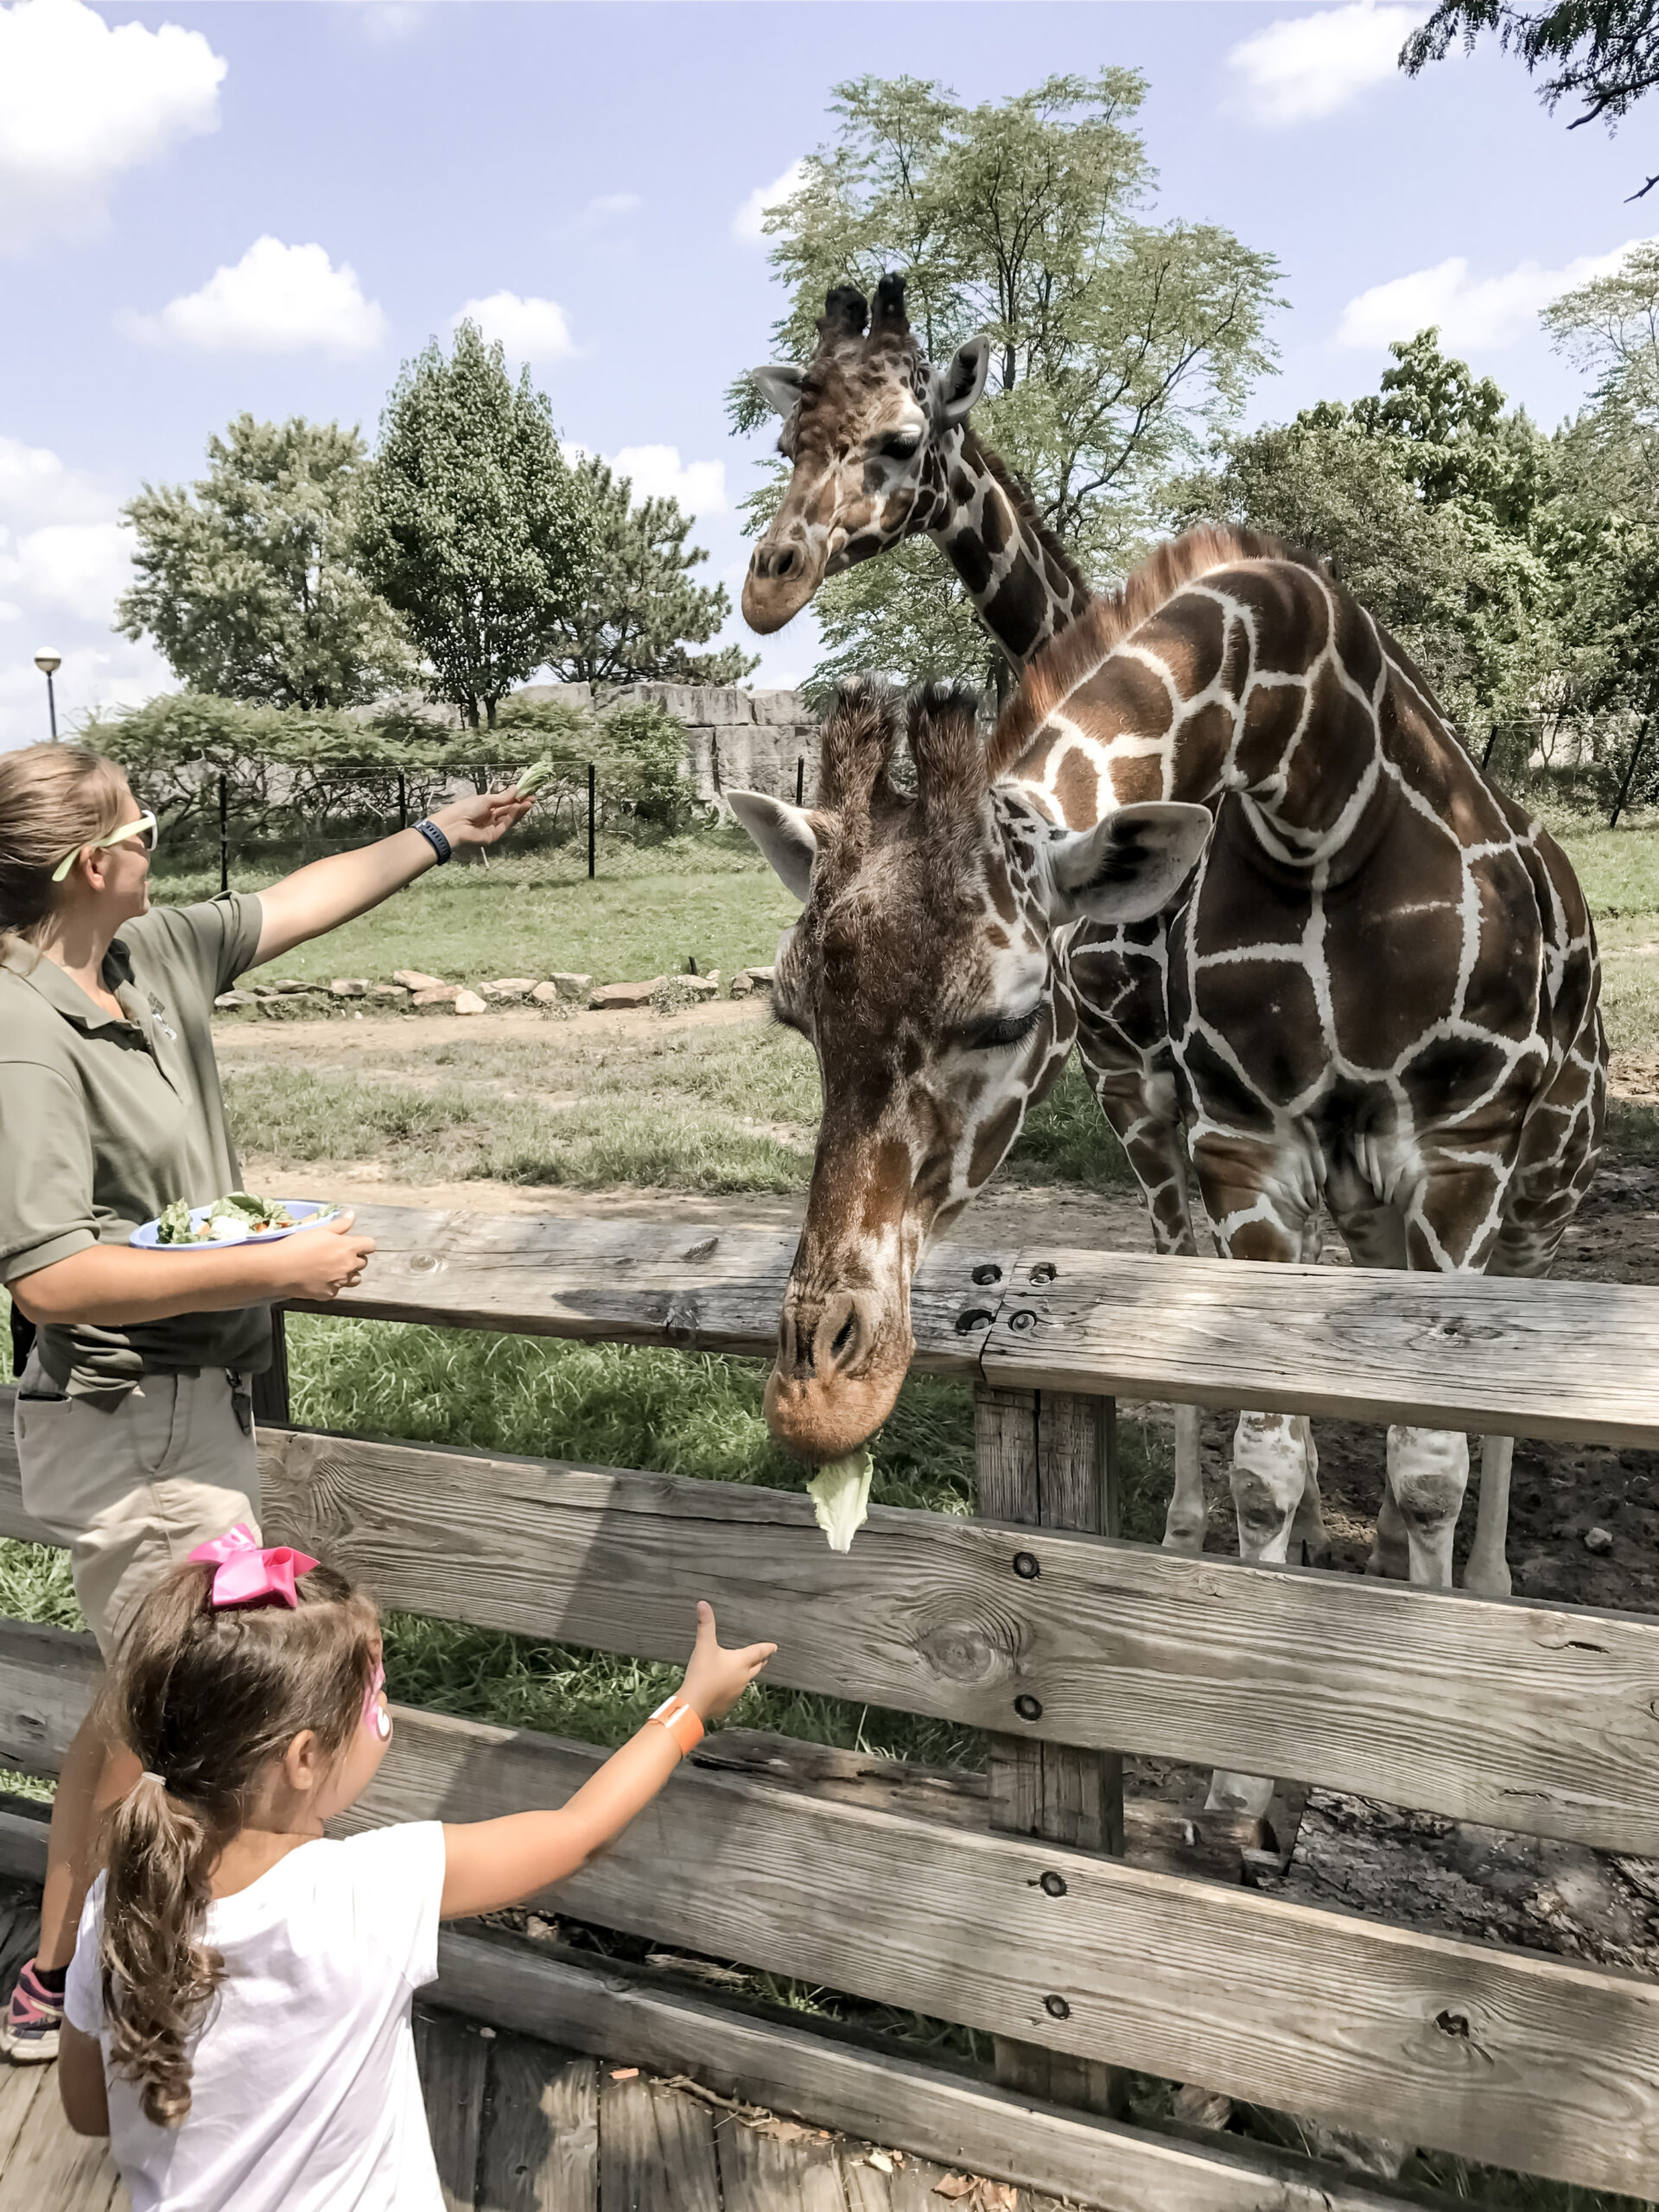 Things for Kids in Indianapolis - Indianapolis Zoo - Feeding the Giraffes